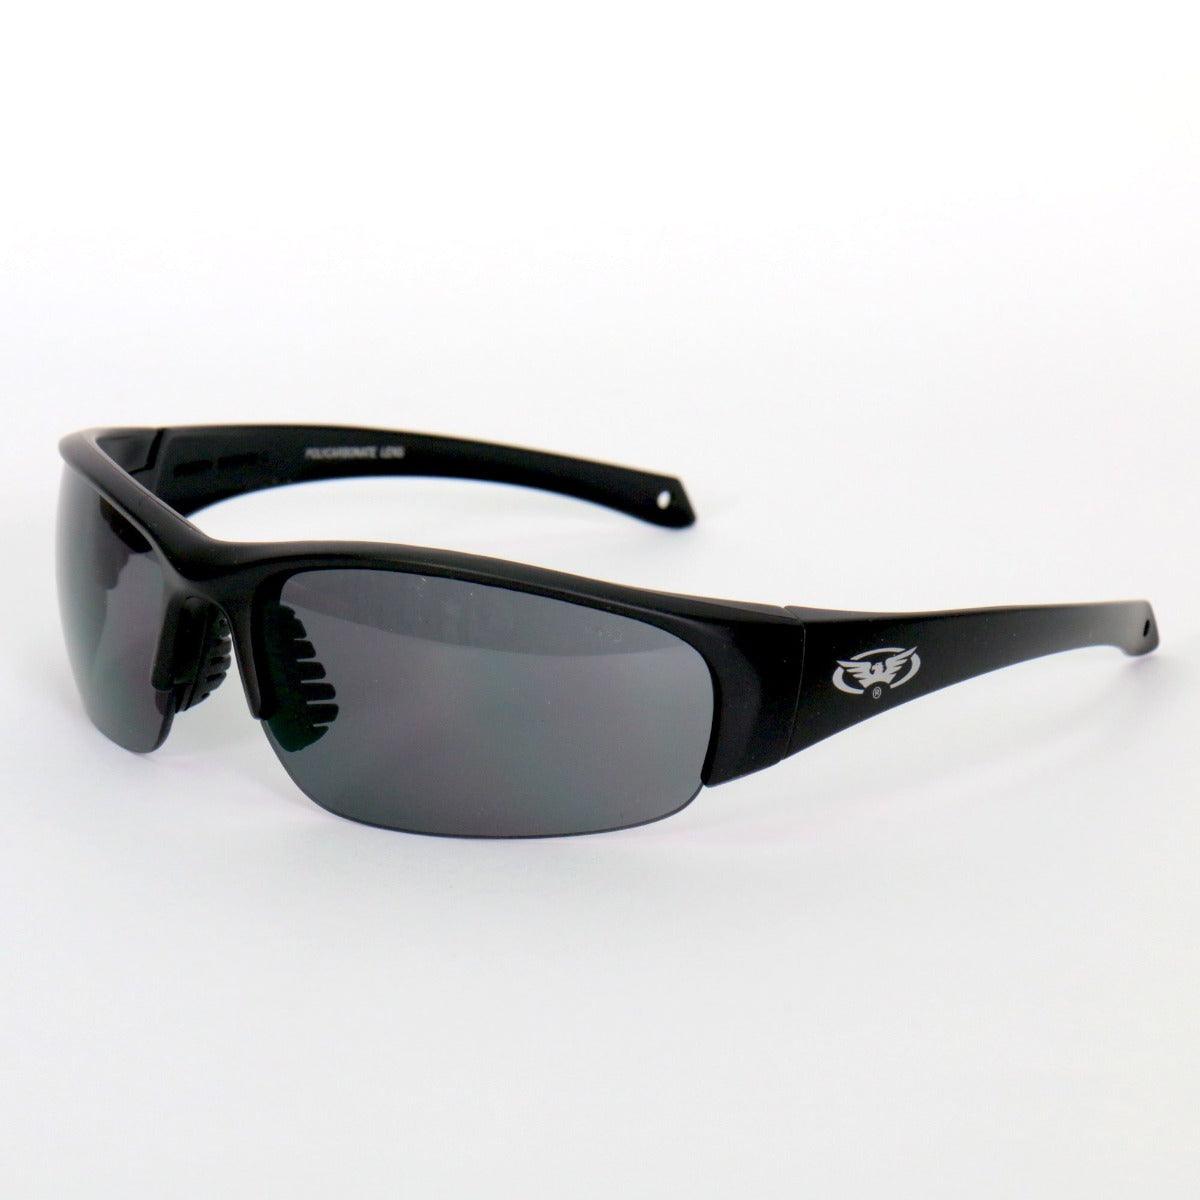 Hot Leathers Eazy Eyes Safety Sunglasses With Smoke Mirror Lenses - American Legend Rider